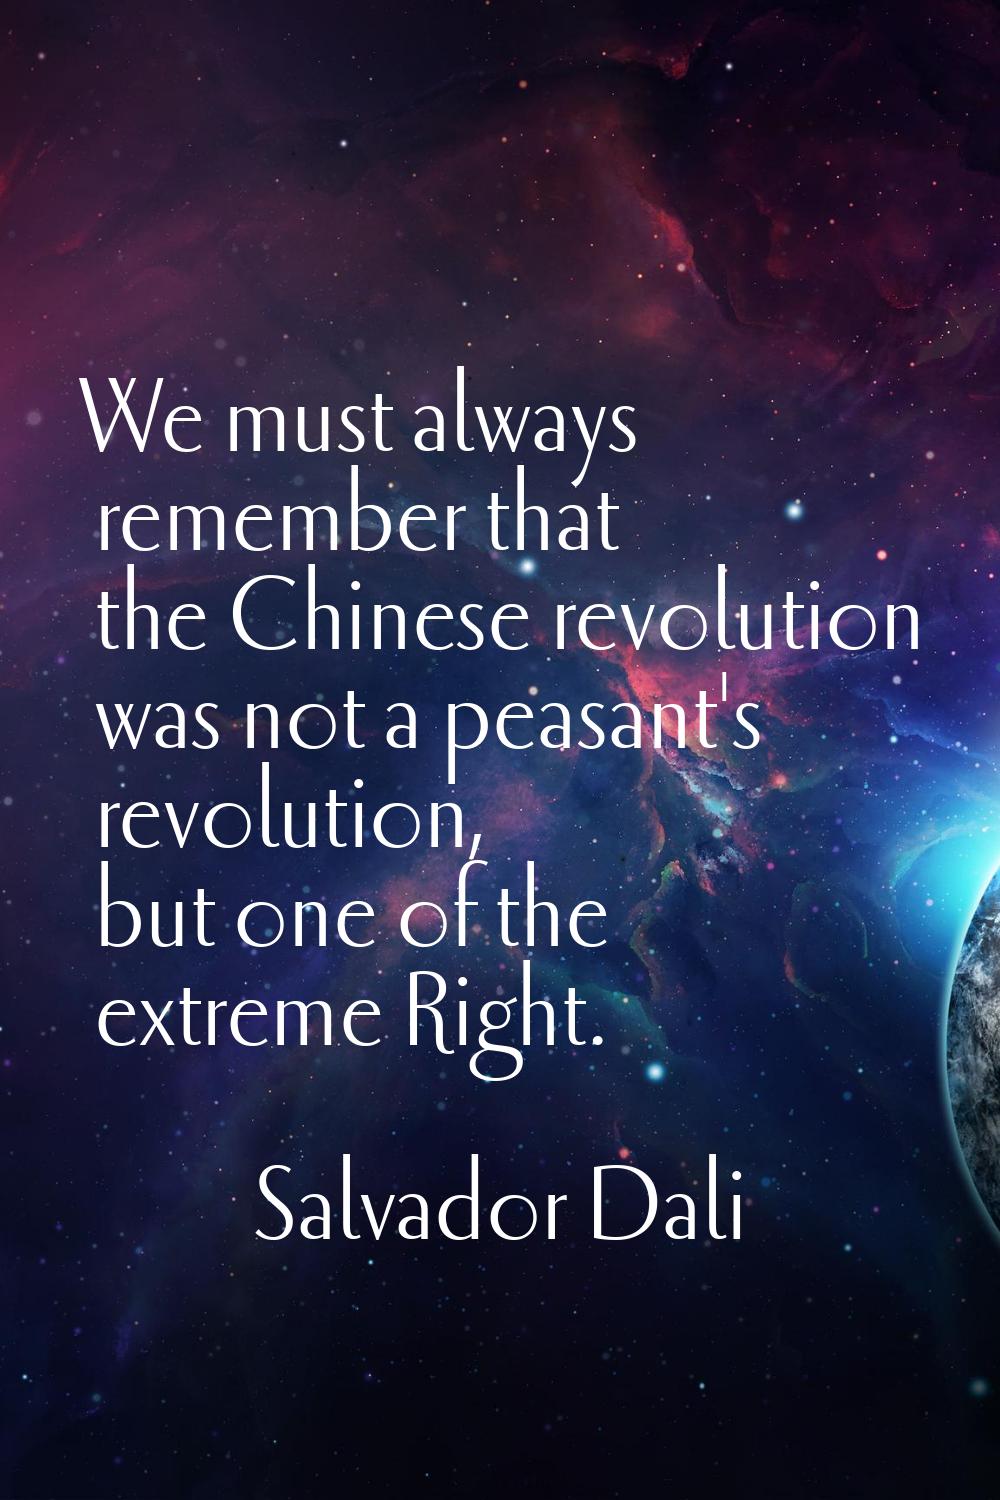 We must always remember that the Chinese revolution was not a peasant's revolution, but one of the 